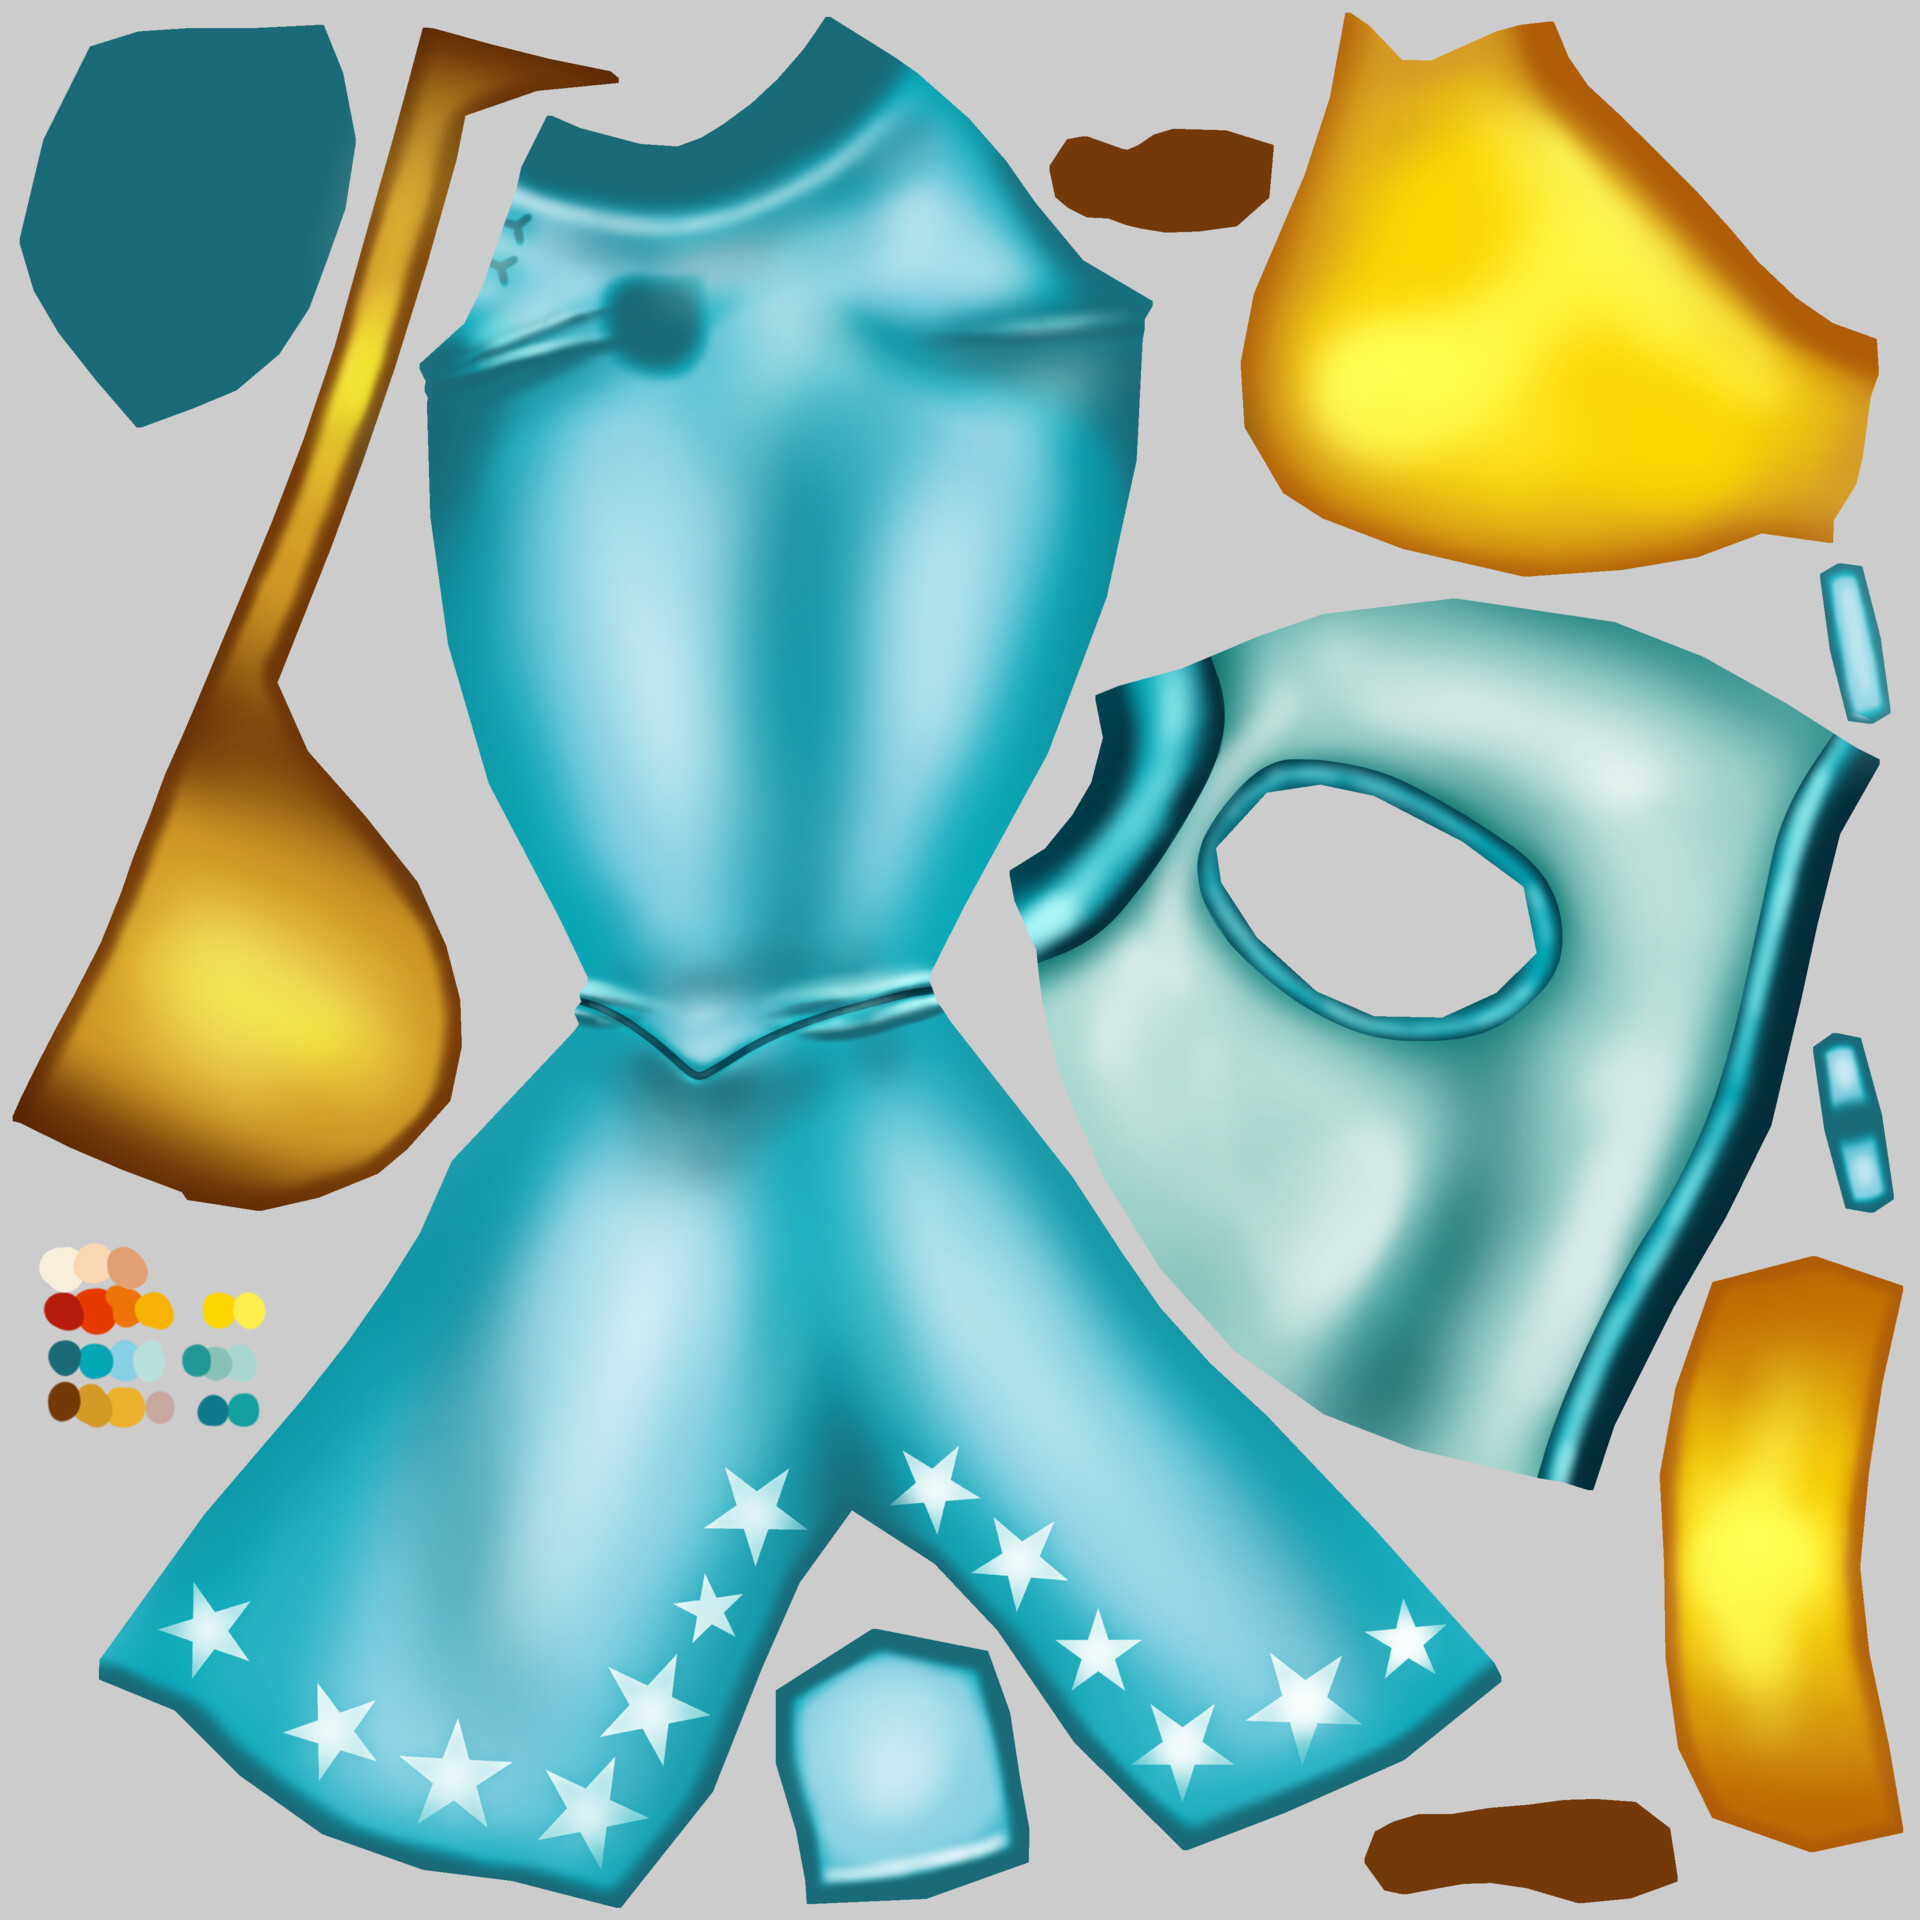 Winx Club Official Bloom Pants - Roblox